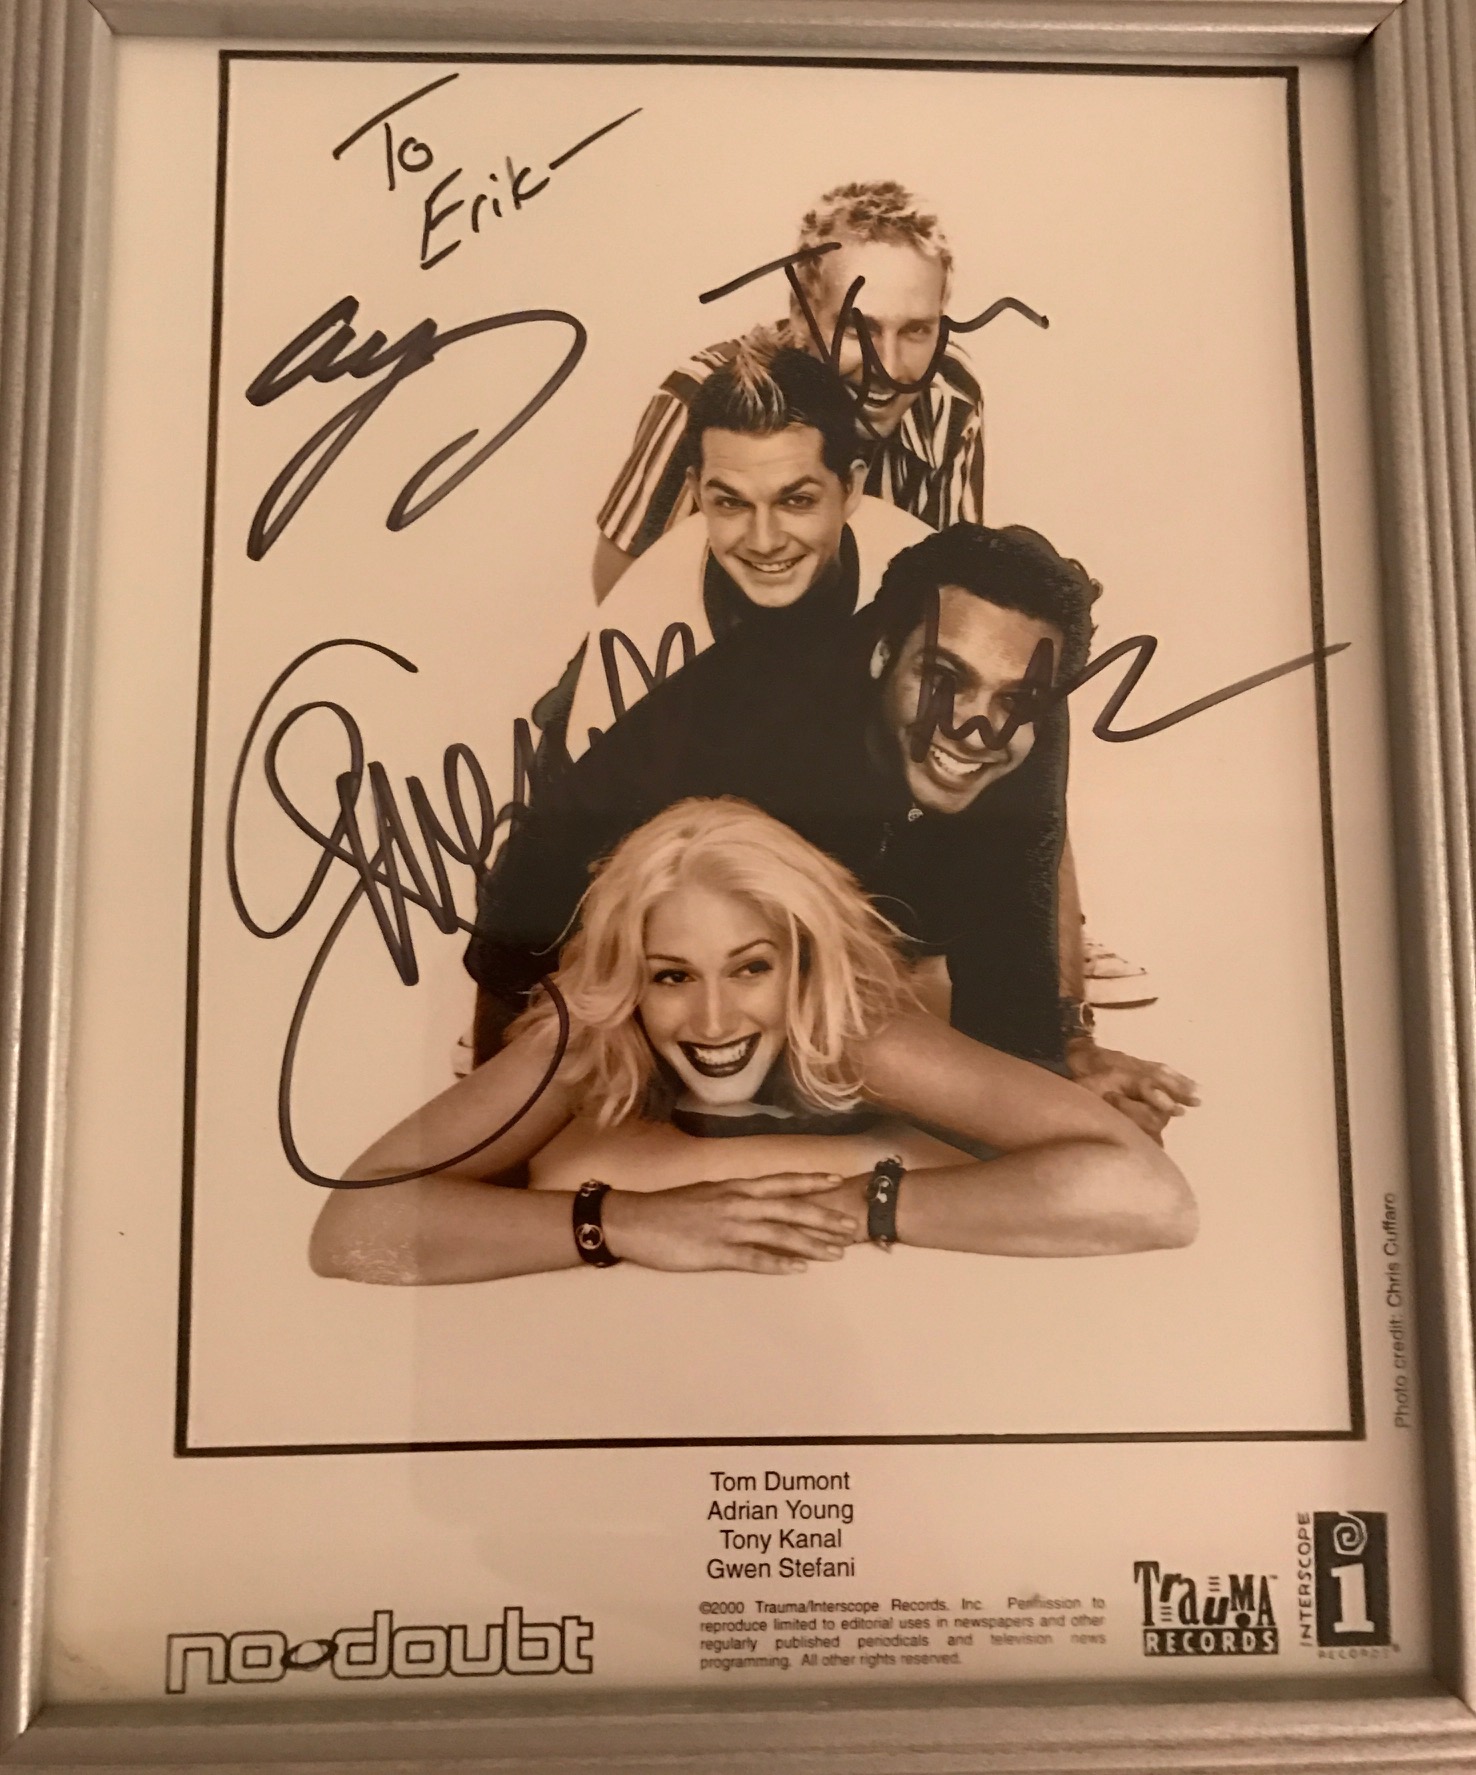 No Doubt photo signed.jpg